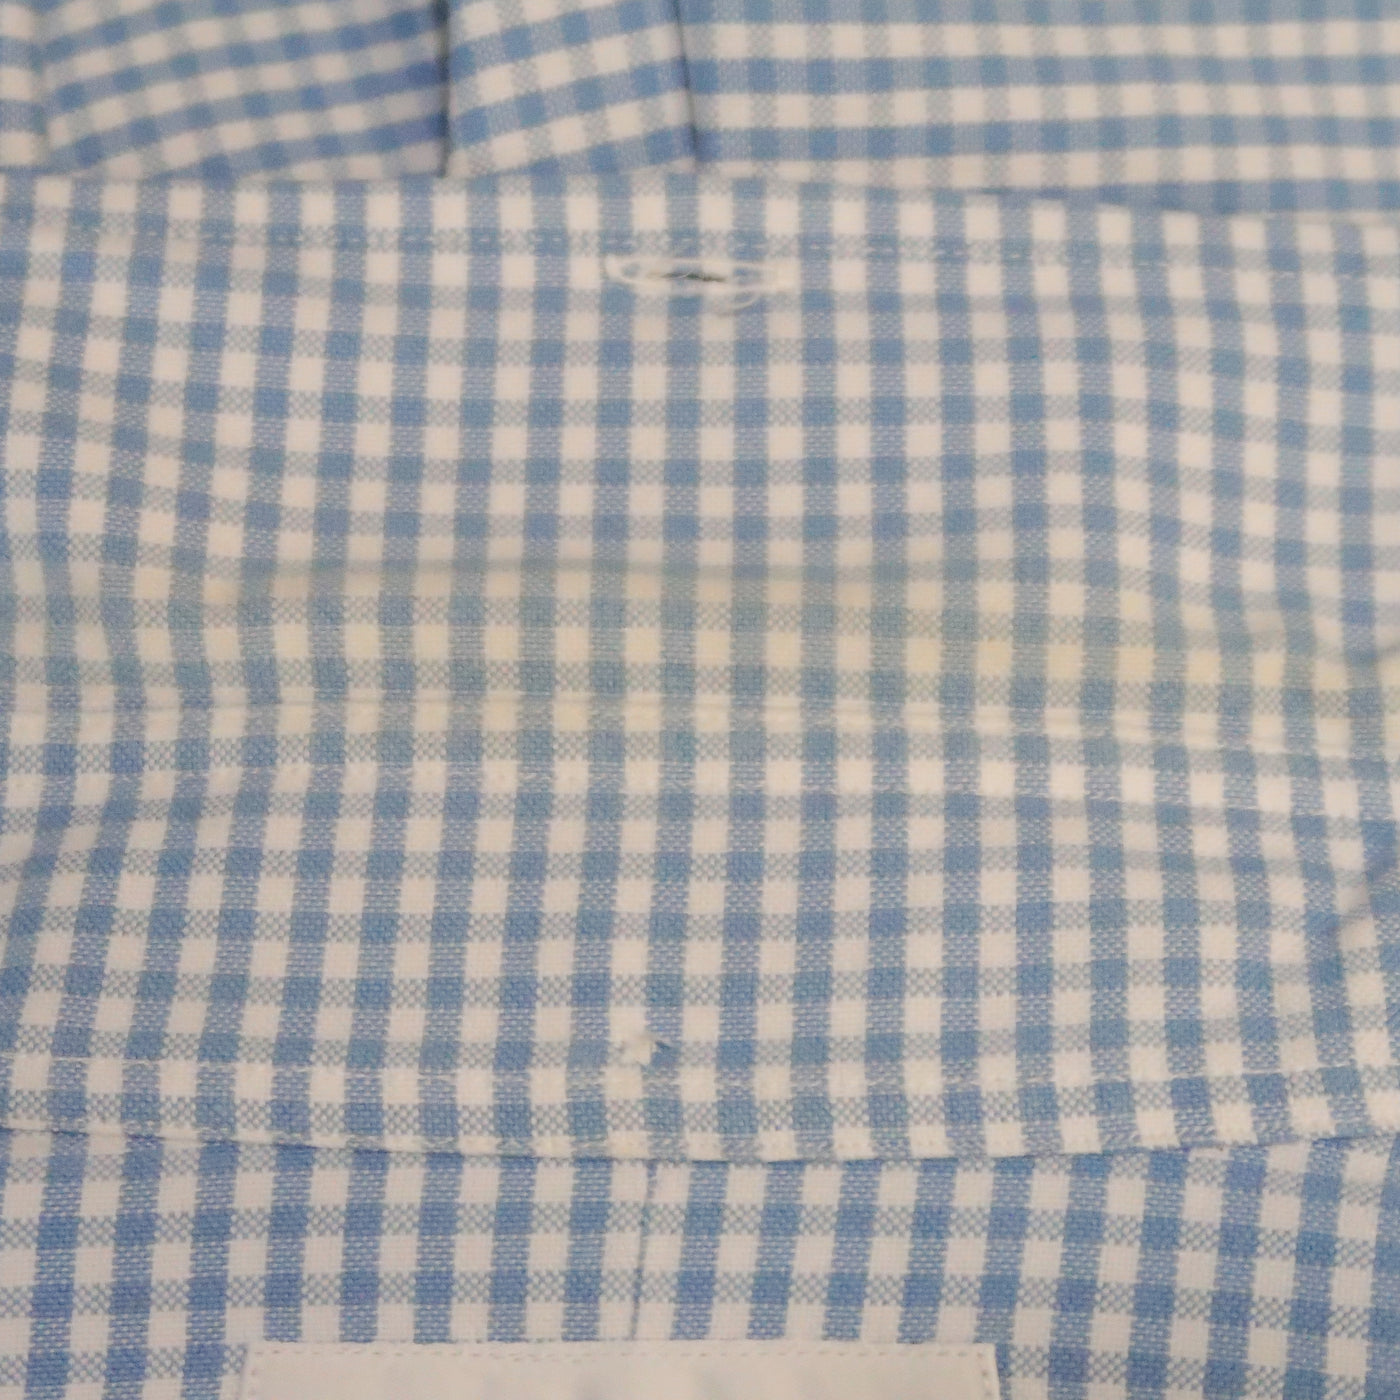 THOM BROWNE Size S Blue & White Checkered Cotton Button Down Long Sleeve Shirt